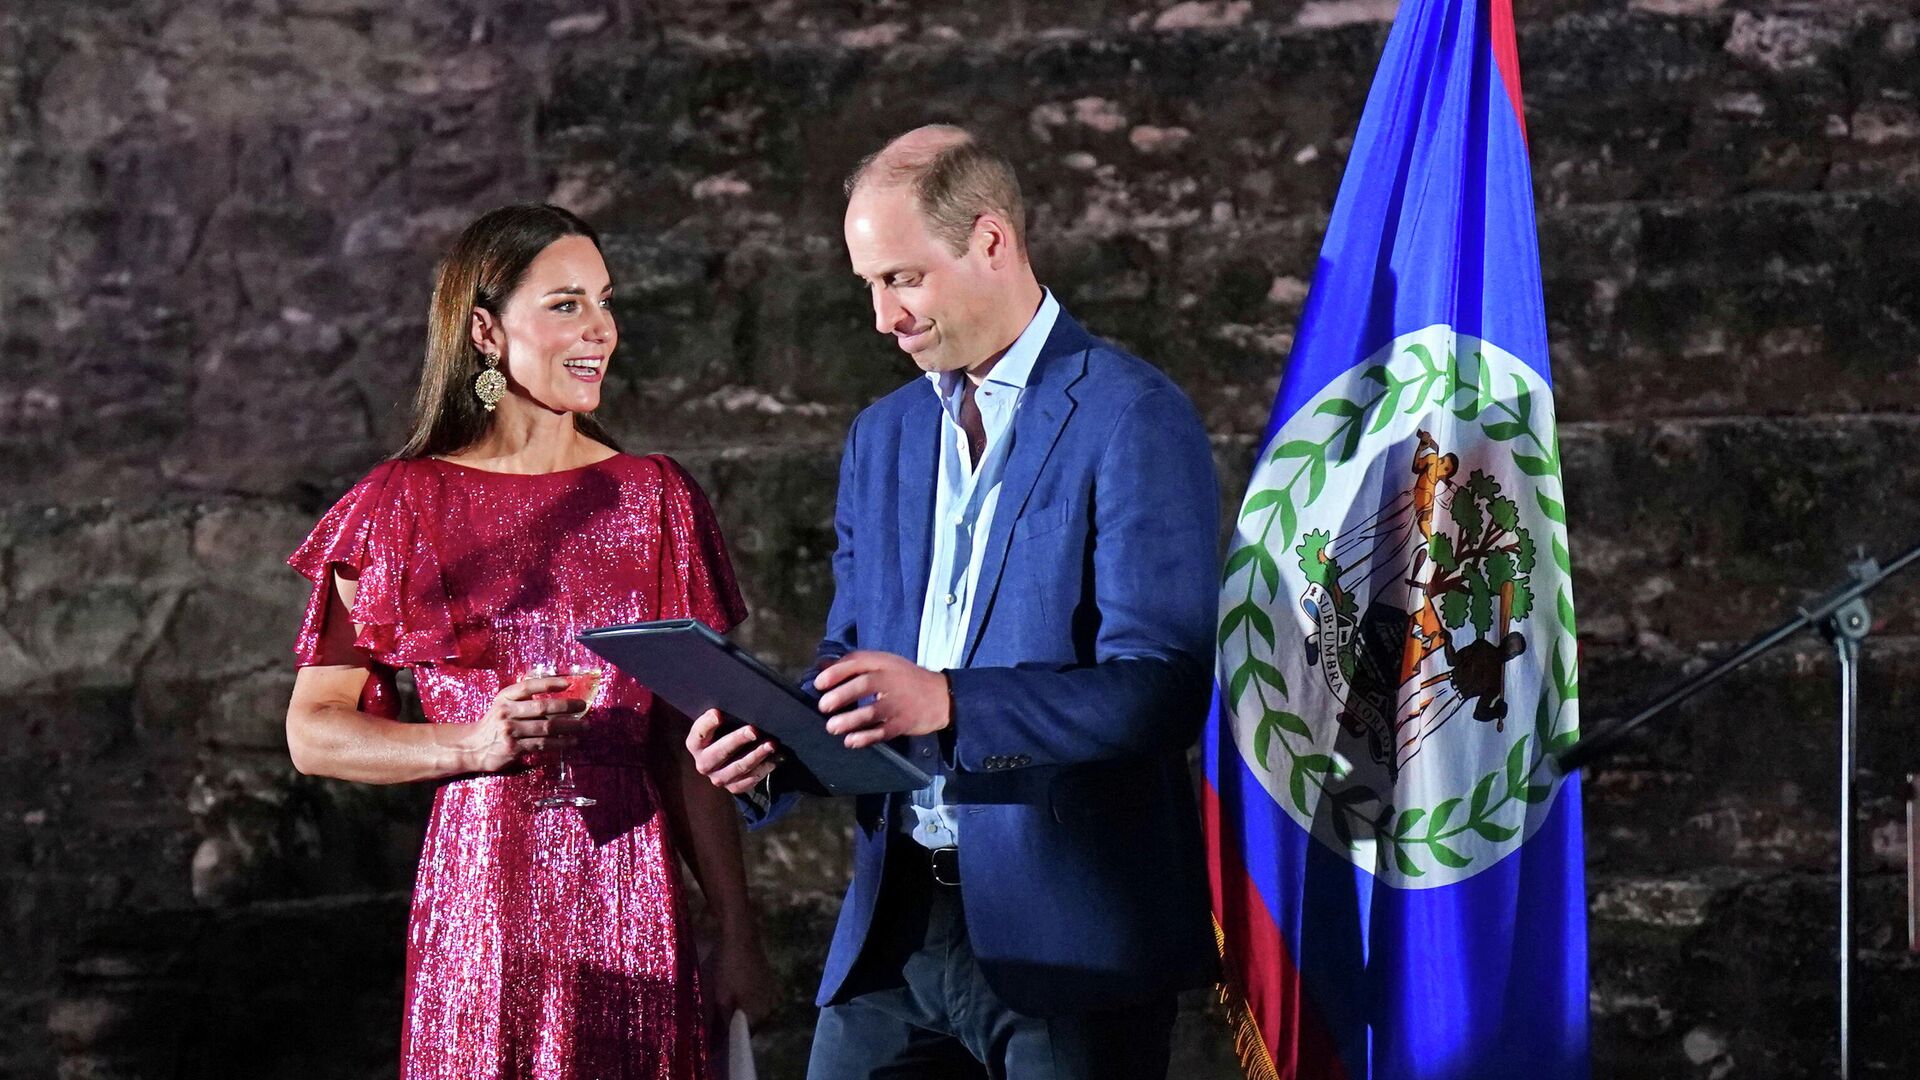 Prince William and Catherine, Duchess of Cambridge attend a special reception in celebration of the Queen's Platinum Jubilee, hosted by the Governor General of Belize Froyla Tzalam, on the third day of their tour of the Caribbean, at the Mayan ruins at Cahal Pech, Belize, March 21, 2022.  - Sputnik International, 1920, 22.03.2022